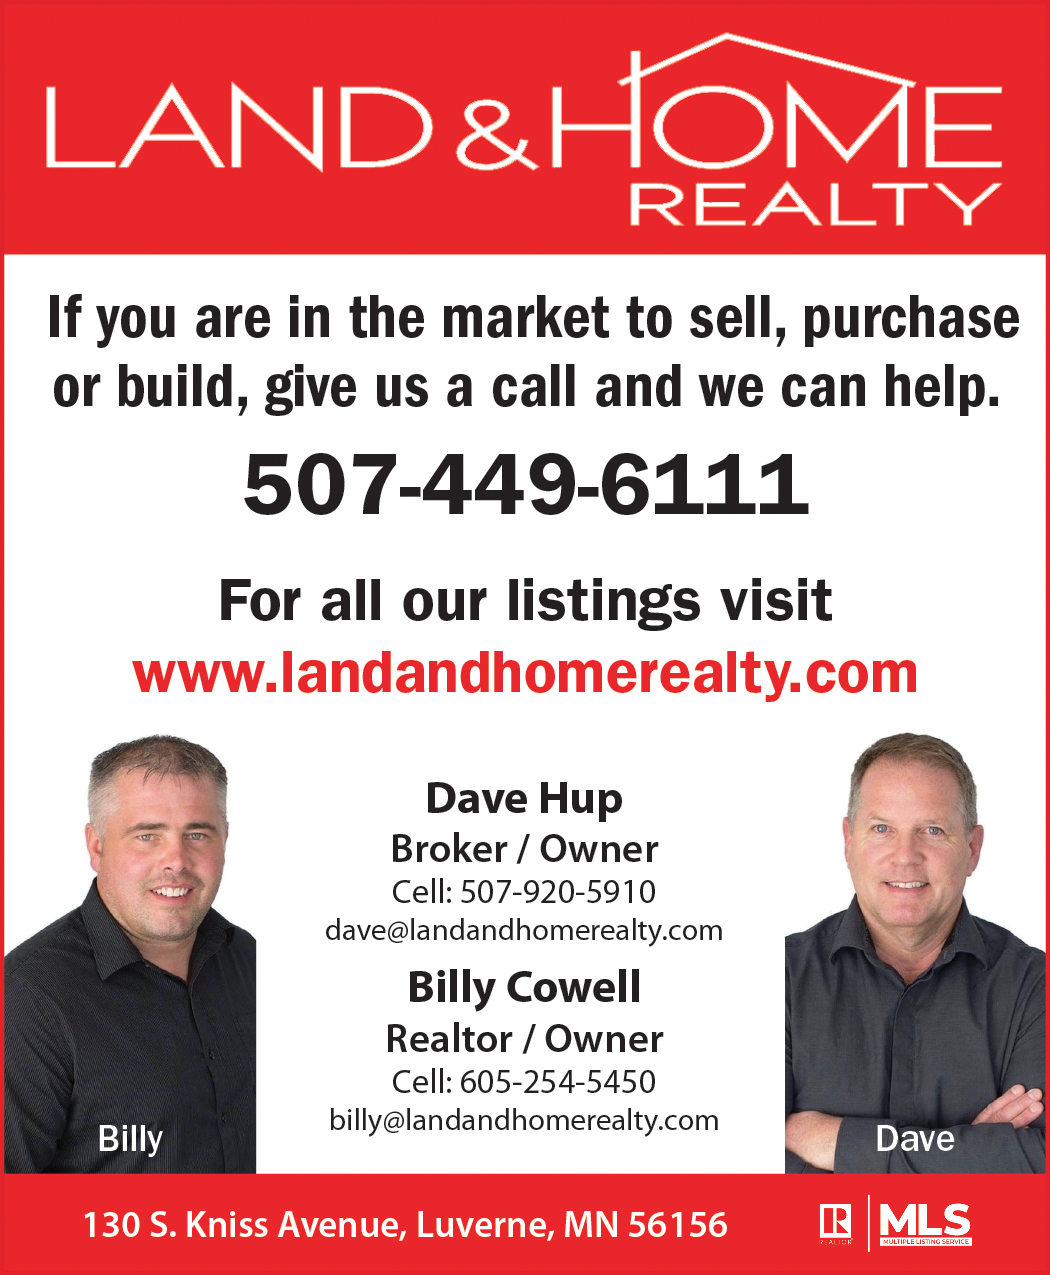 Land & Home Realty - Dave Hup & Billy Cowell